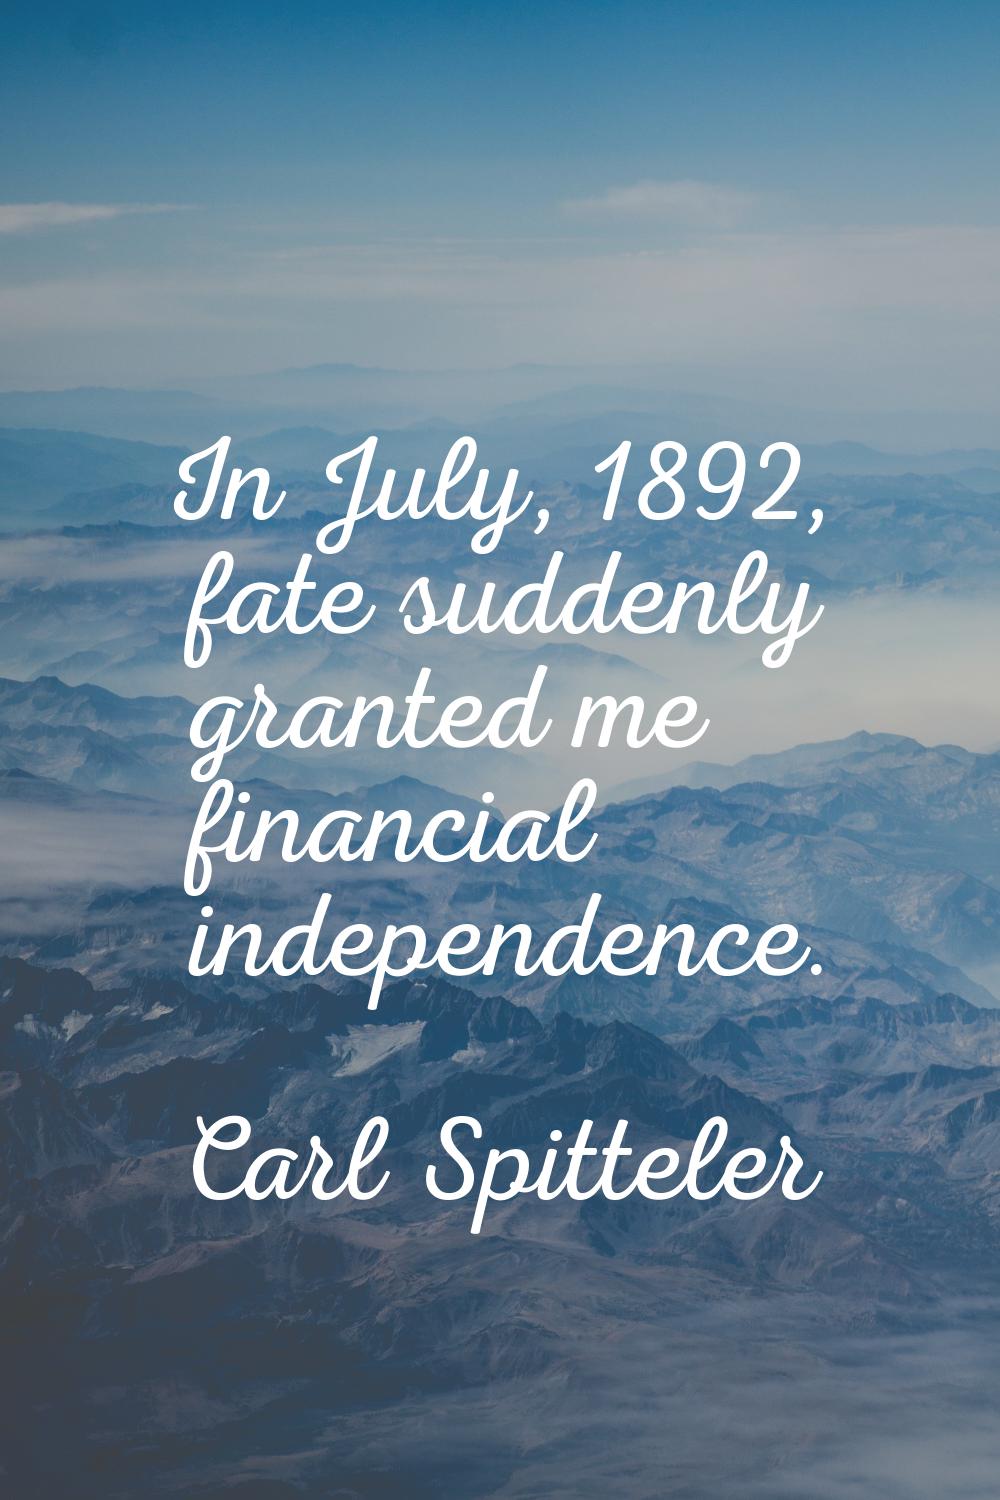 In July, 1892, fate suddenly granted me financial independence.